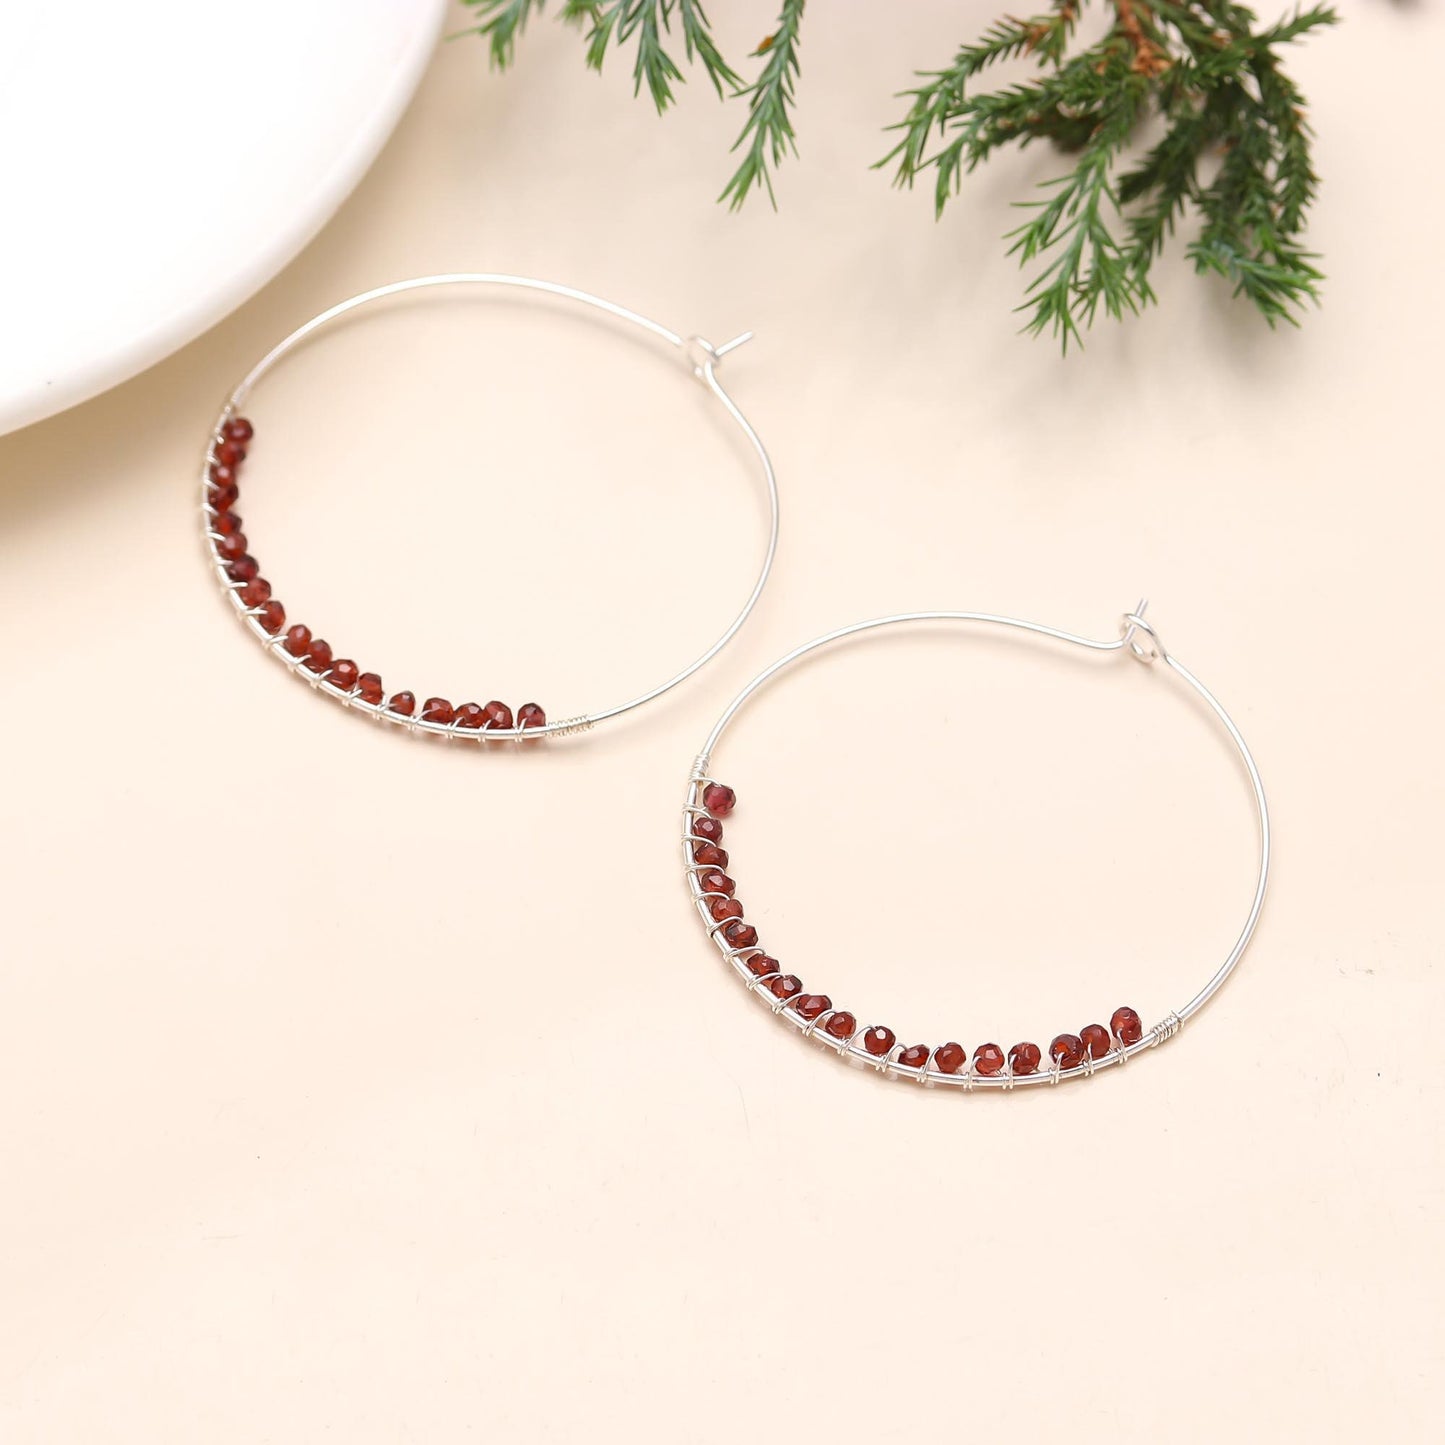 Solid 925 Sterling Silver Big Hoop Earring in Garnet Round Beads, Gift Birthday, Anniversary, Mothers Day, Christmas, Women, Girl